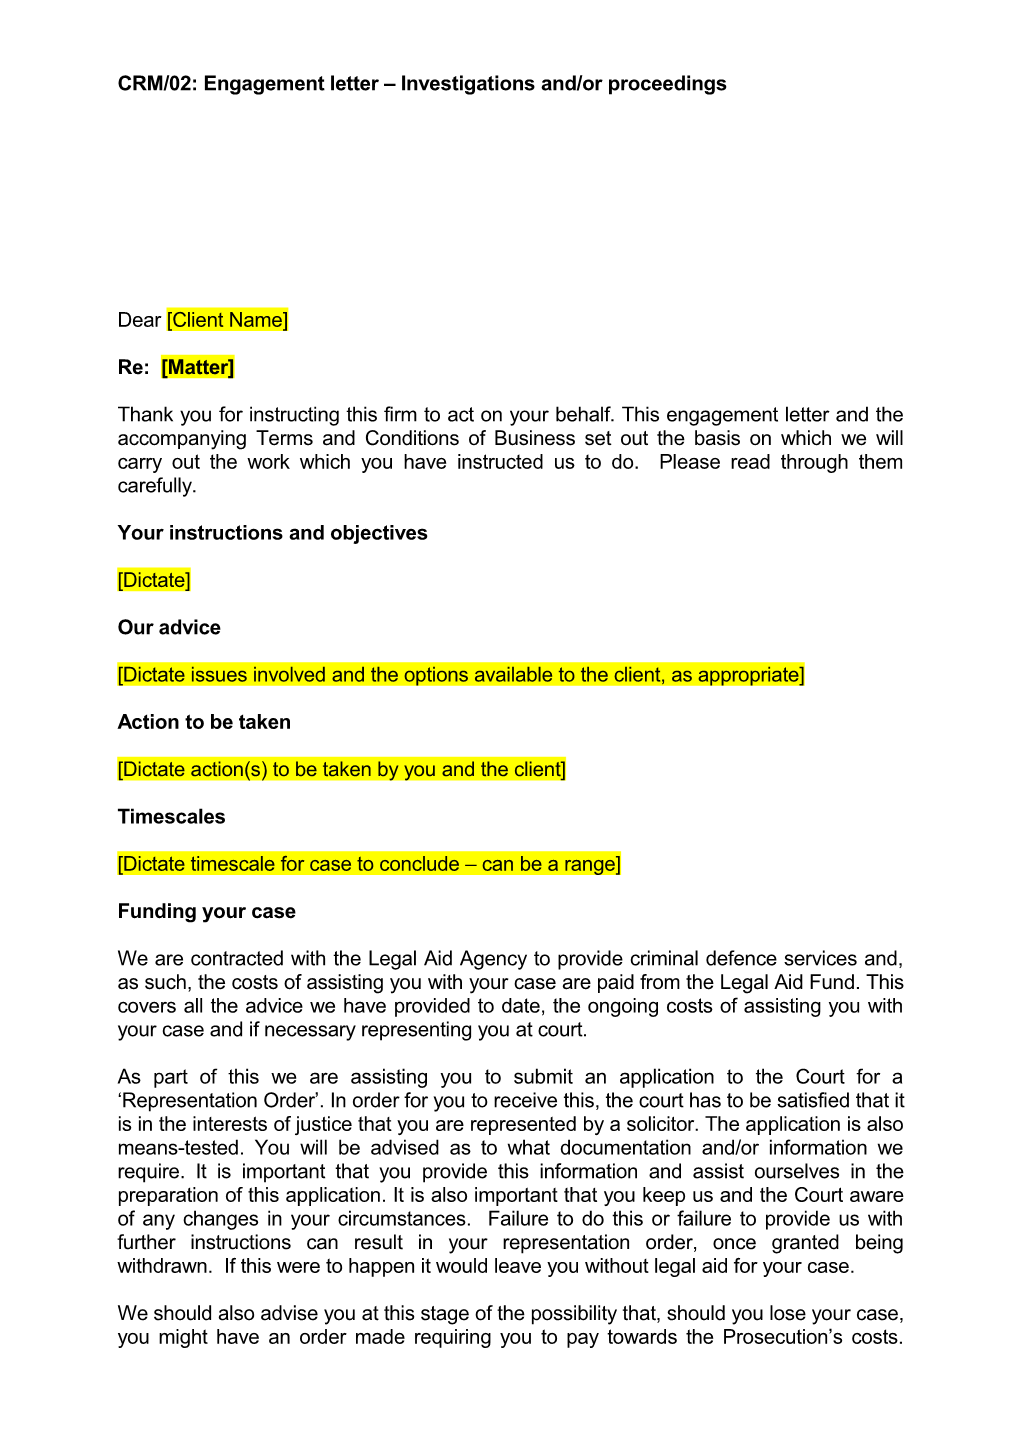 CRM/02: Engagement Letter Investigations And/Or Proceedings